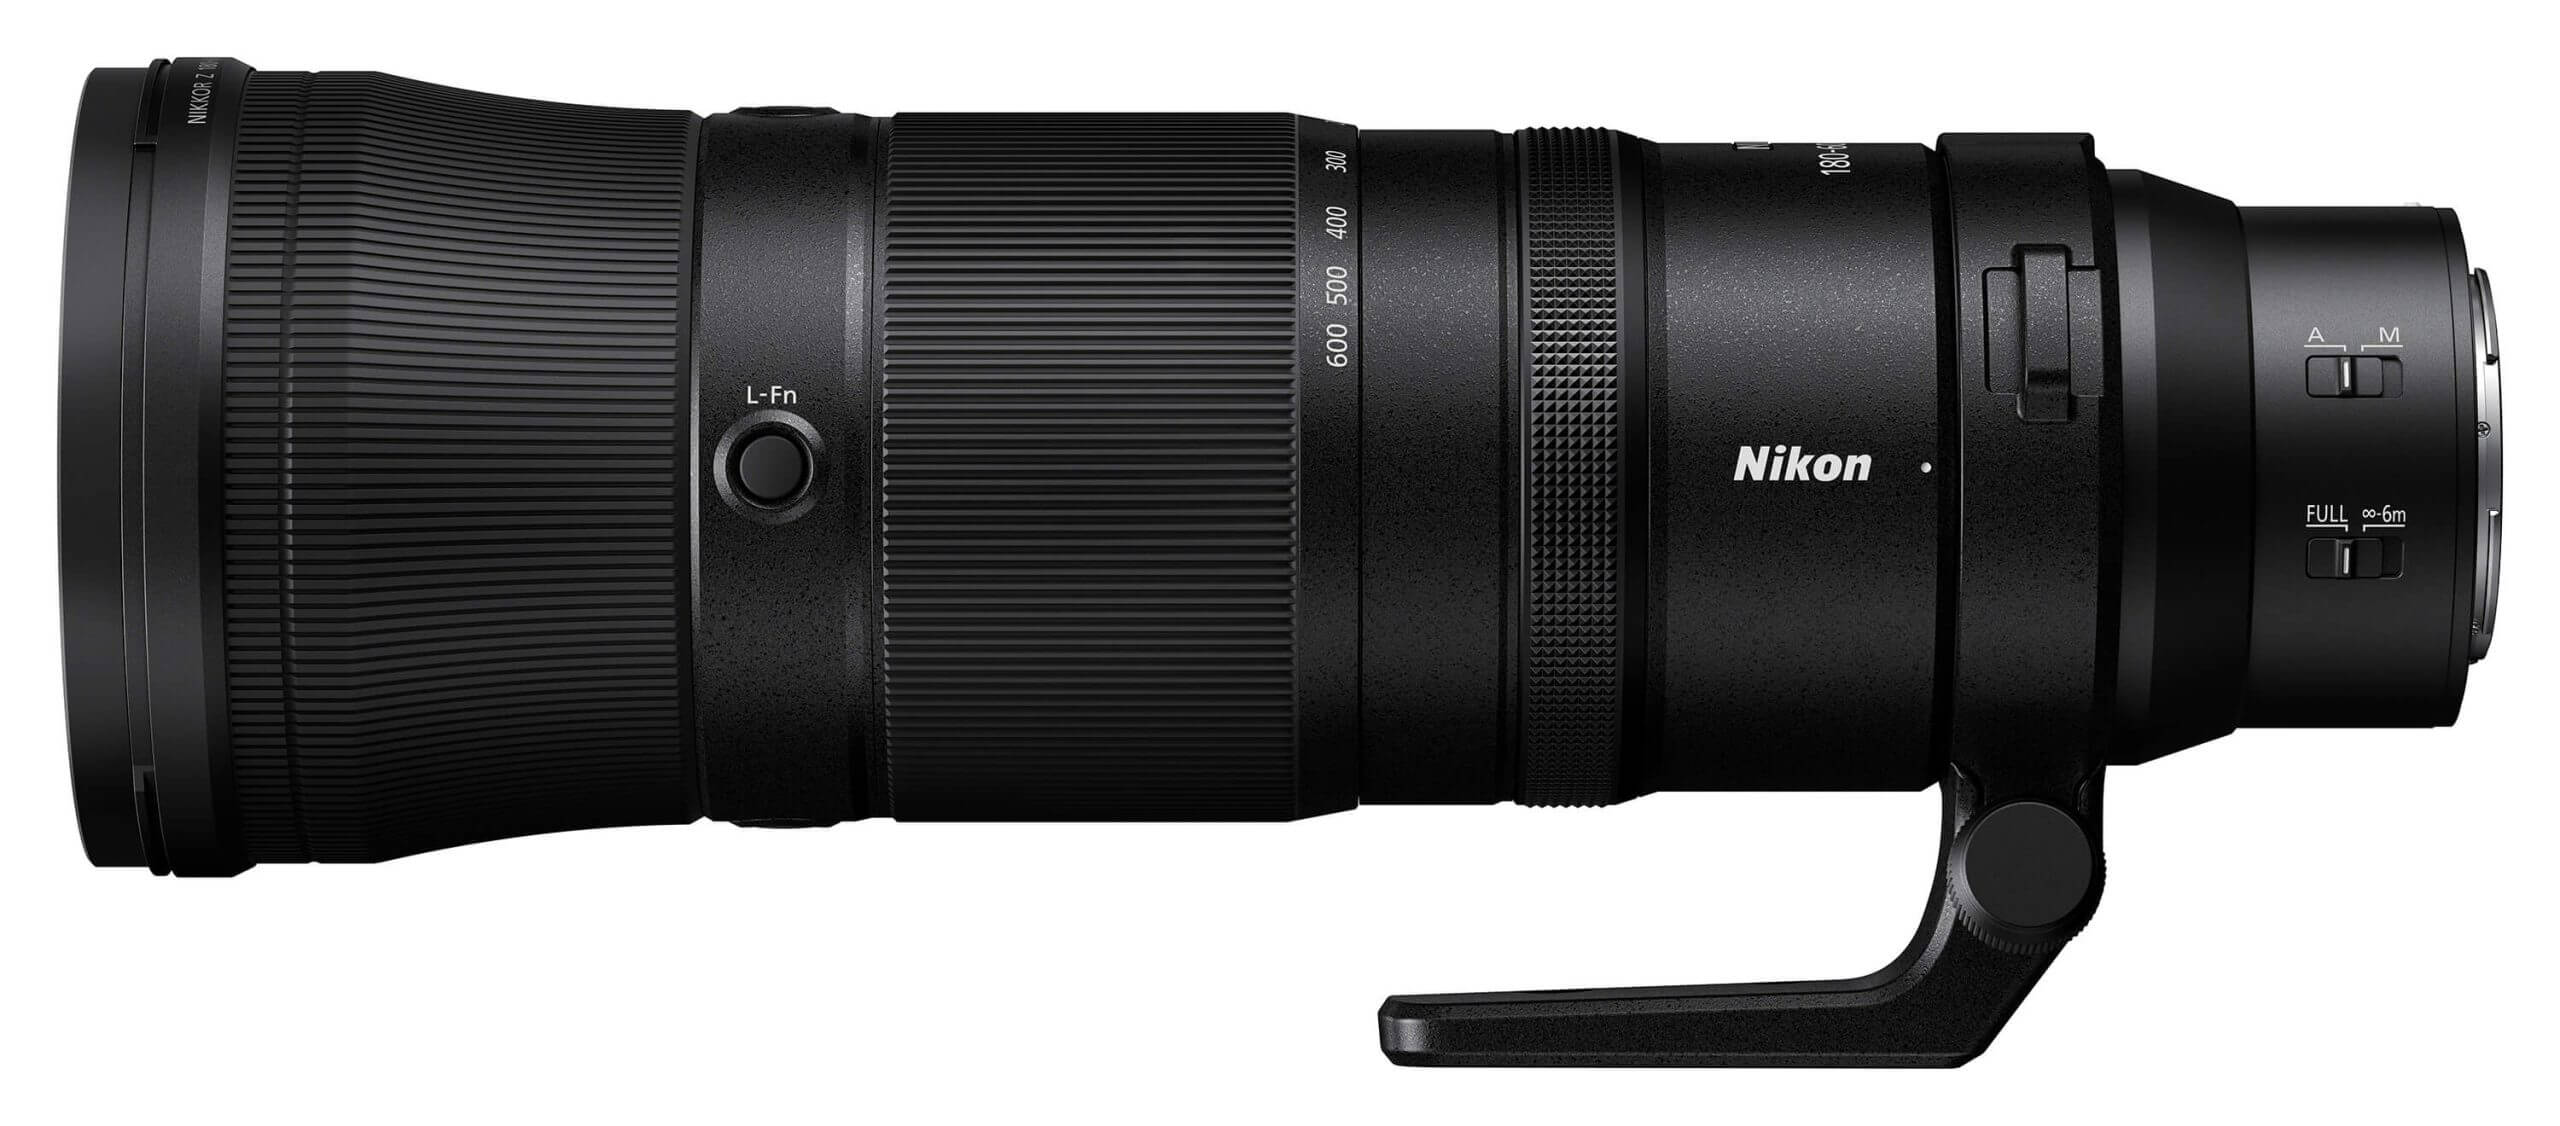 Z180 600 5 6 6 3 angle4.high  scaled - Nikon officially announces the Z 180-600mm F/5.6-6.3 VR and Z 70-180mm f/2.8